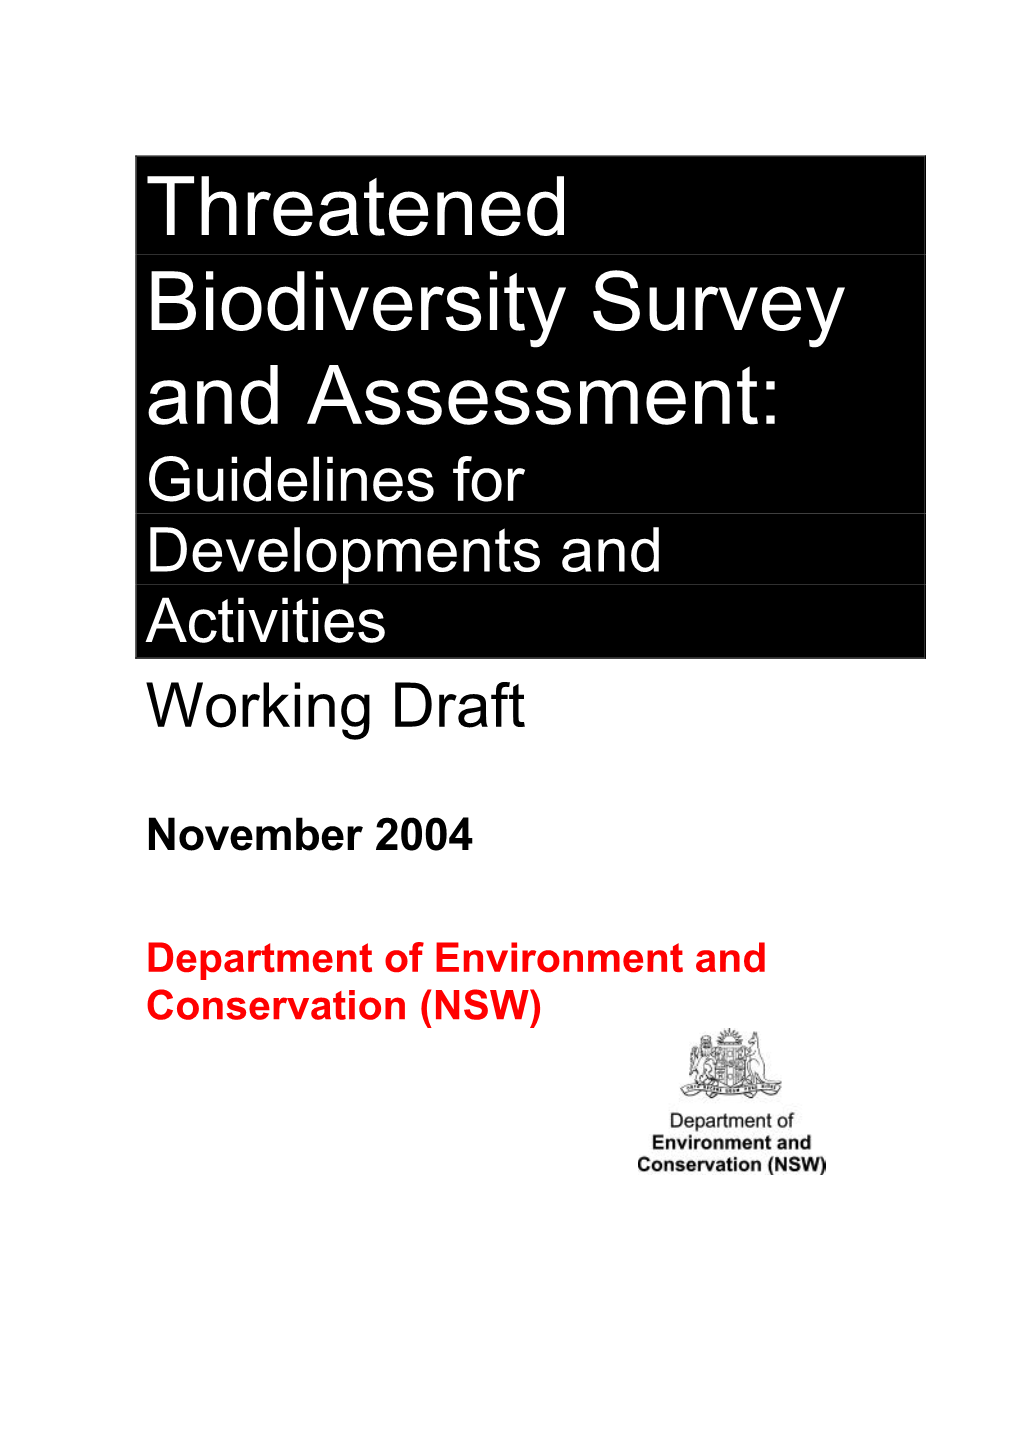 Threatened Biodiversity Survey and Assessment: Guidelines for Developments and Activities Working Draft